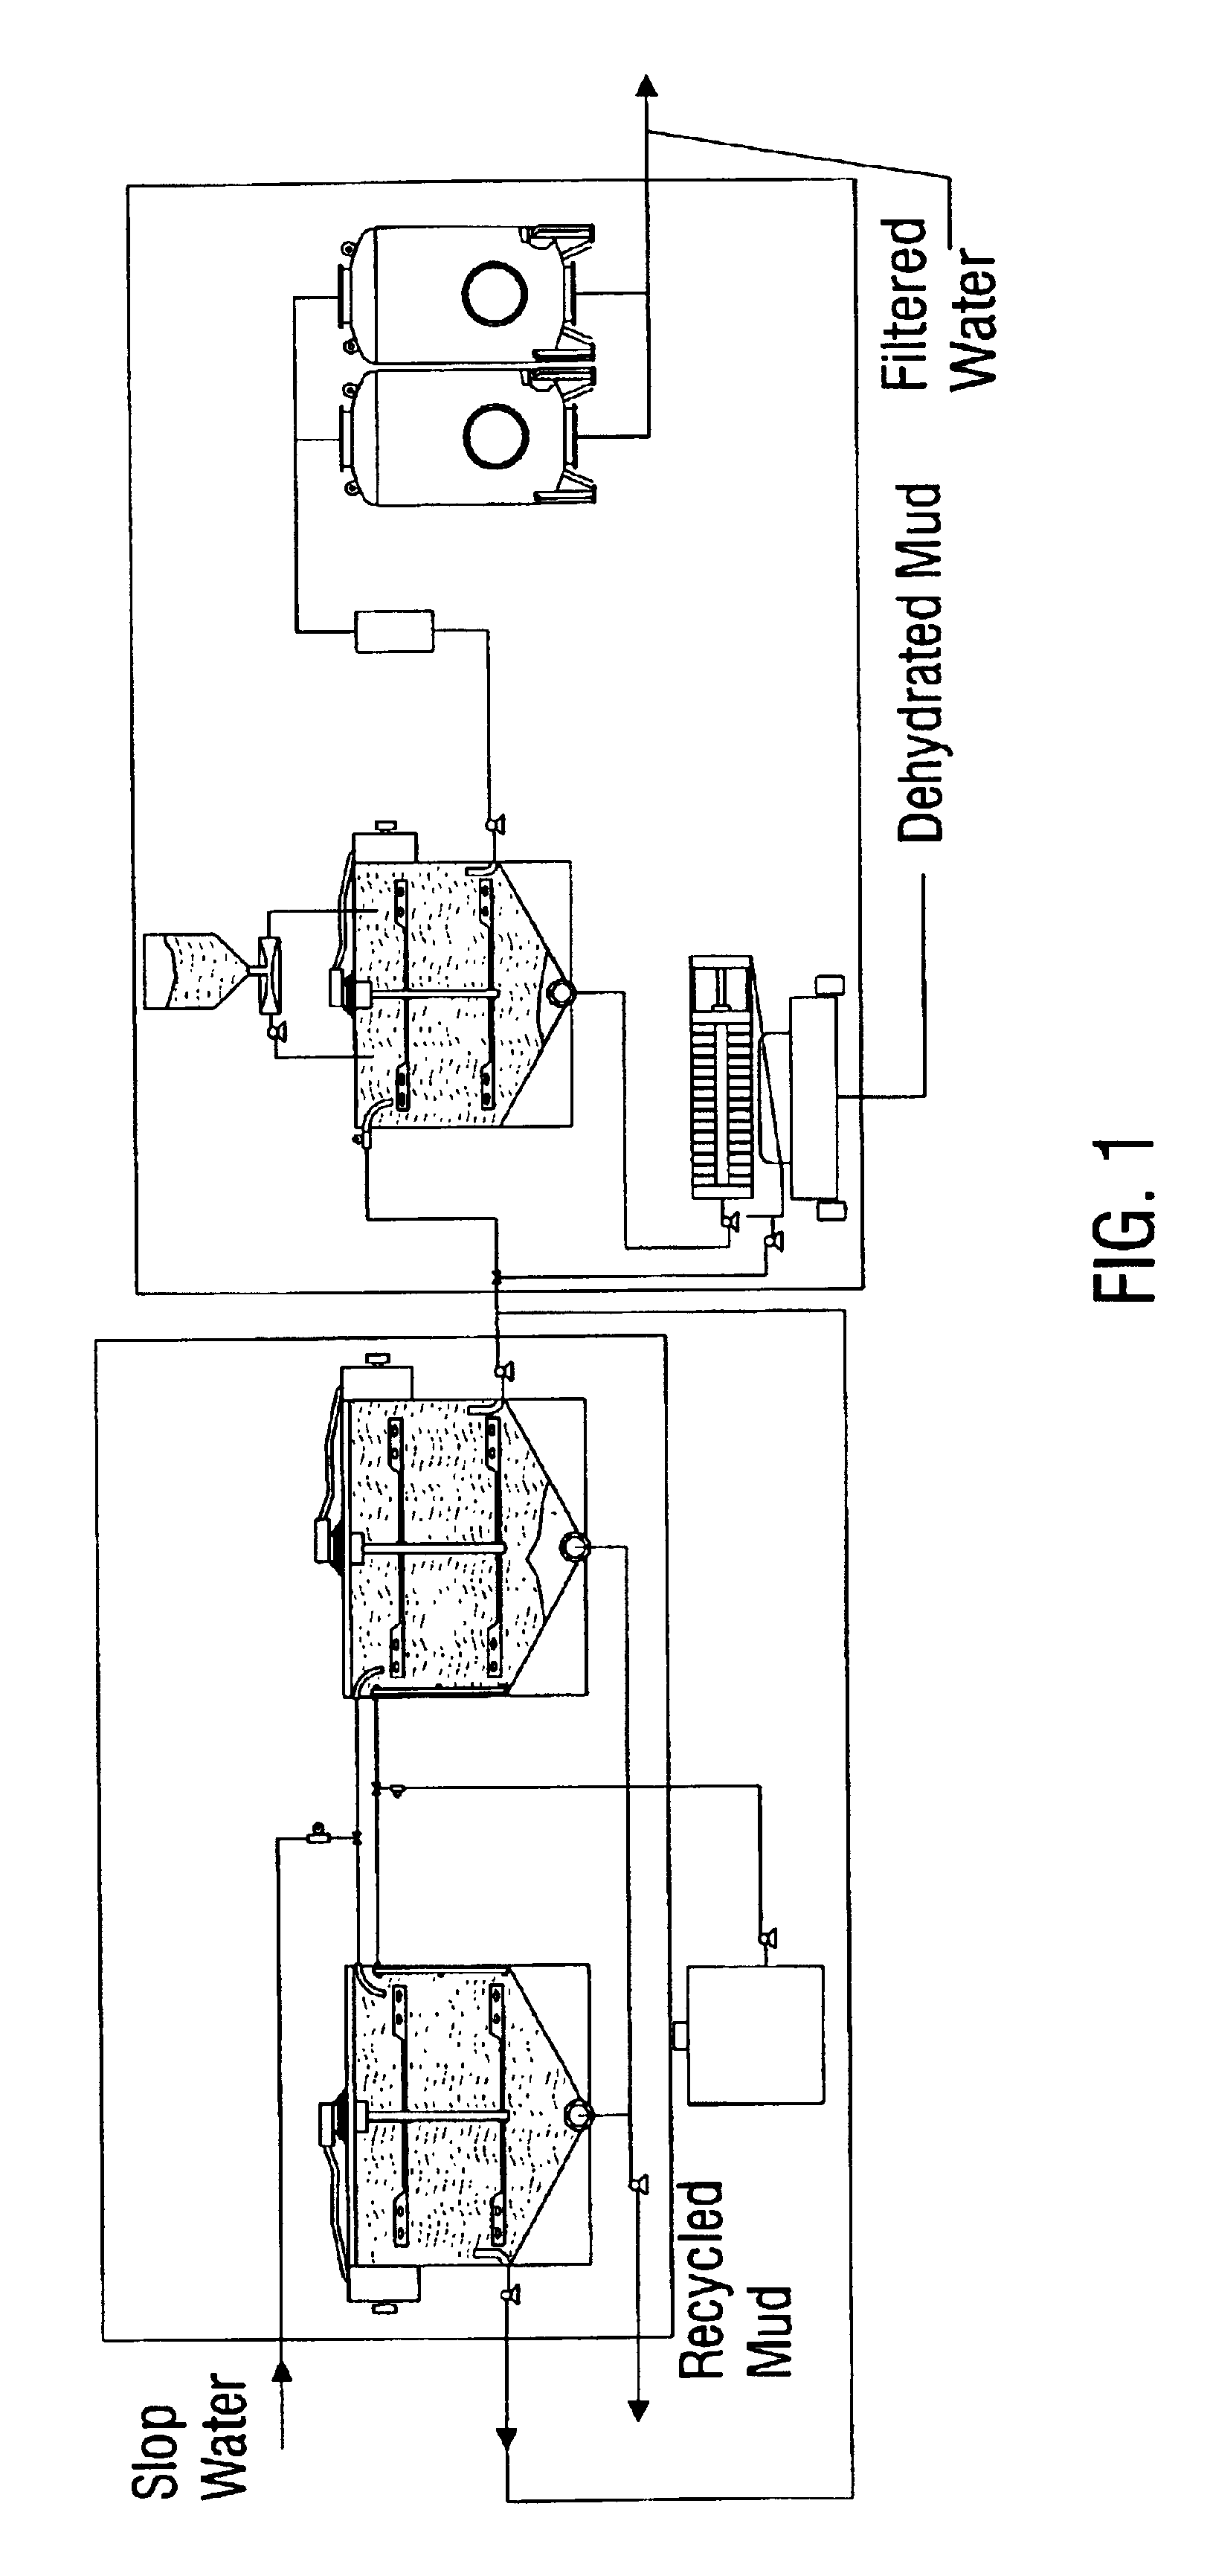 Method for recycling of oil based drilling fluid contaminated with water and water contaminated with oil based drilling fluid